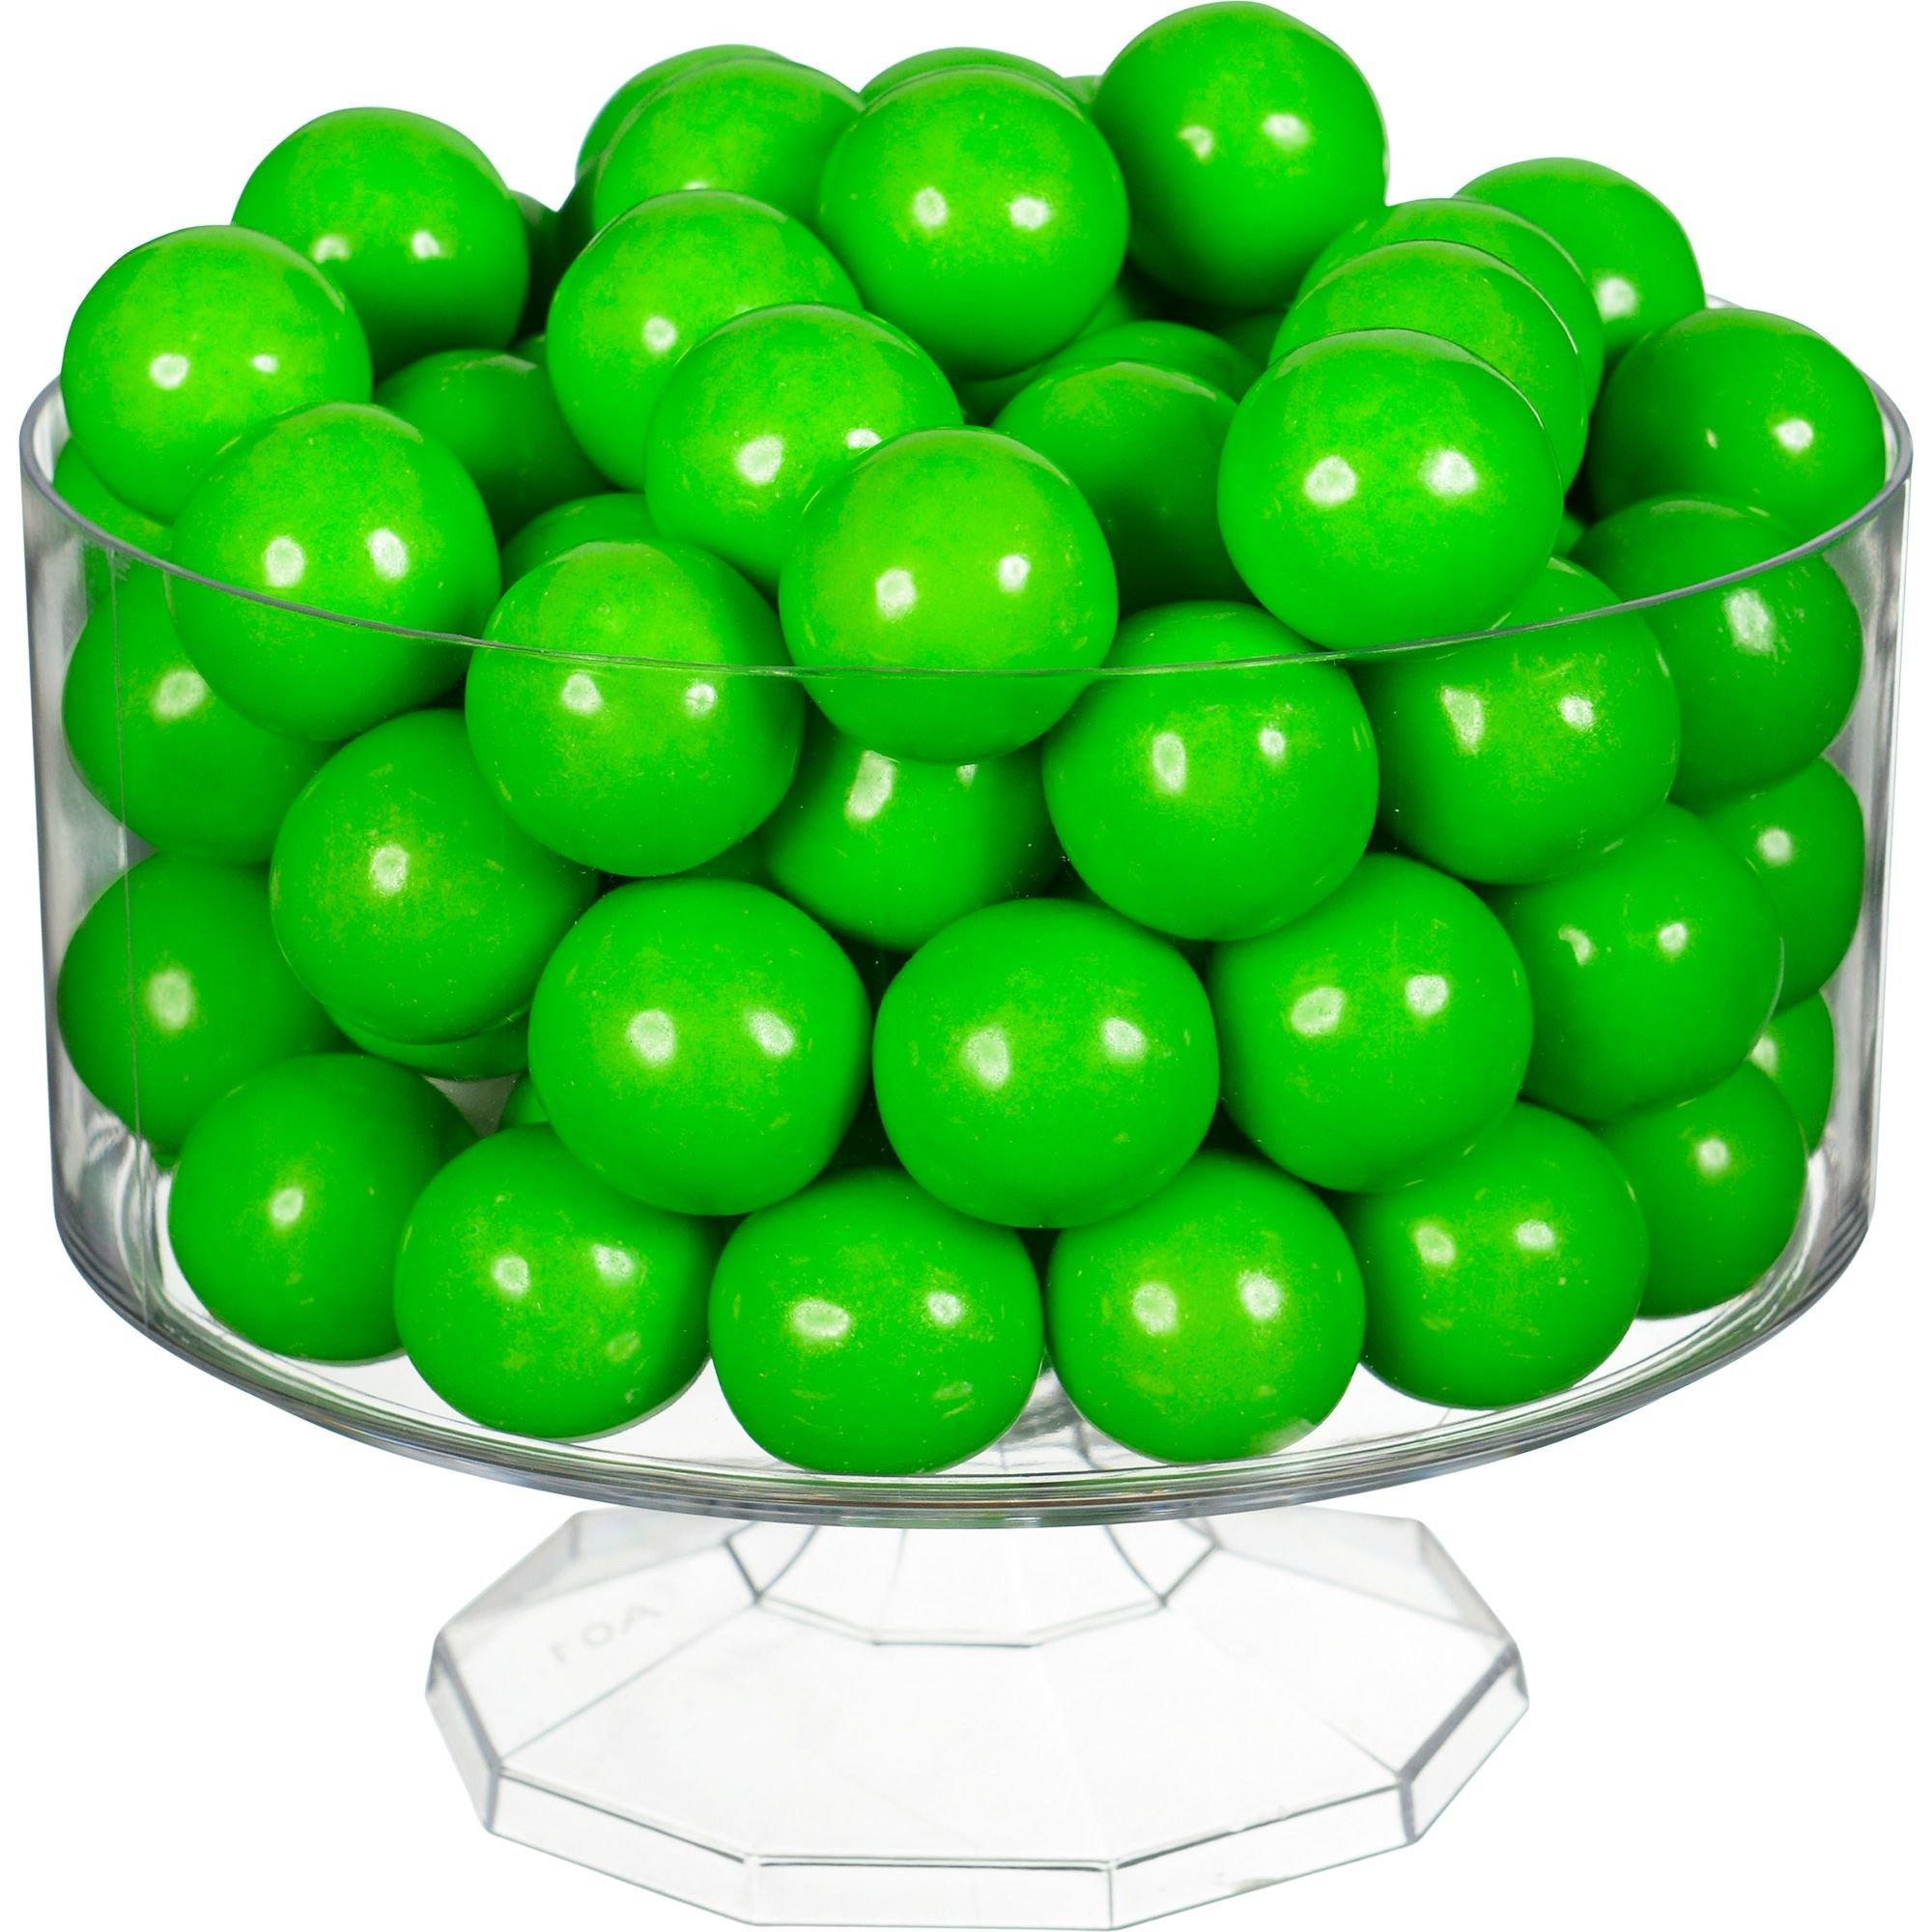 Crayon Green Apple (10 ct) - Wholesale Candy Warehouse